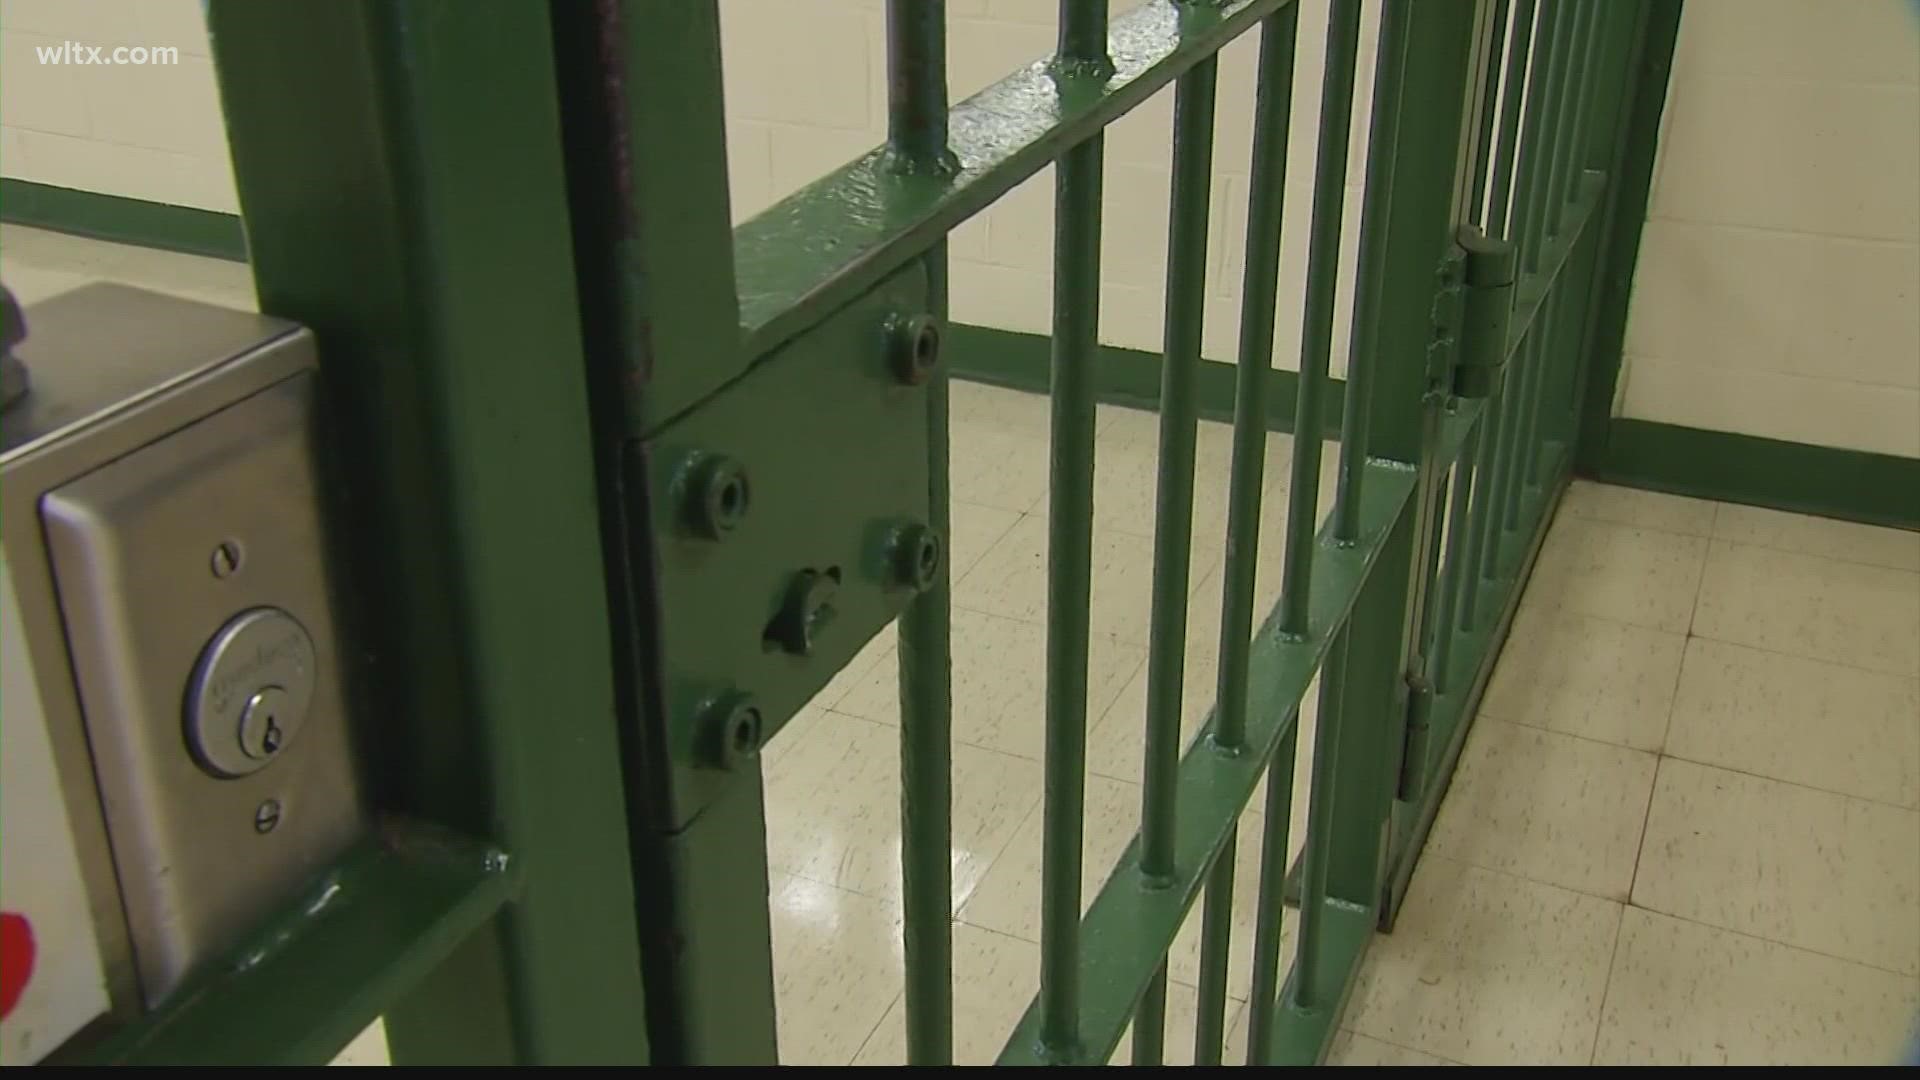 New data shows South Carolina has one of the lowest rates of inmates recommitting crimes once released.